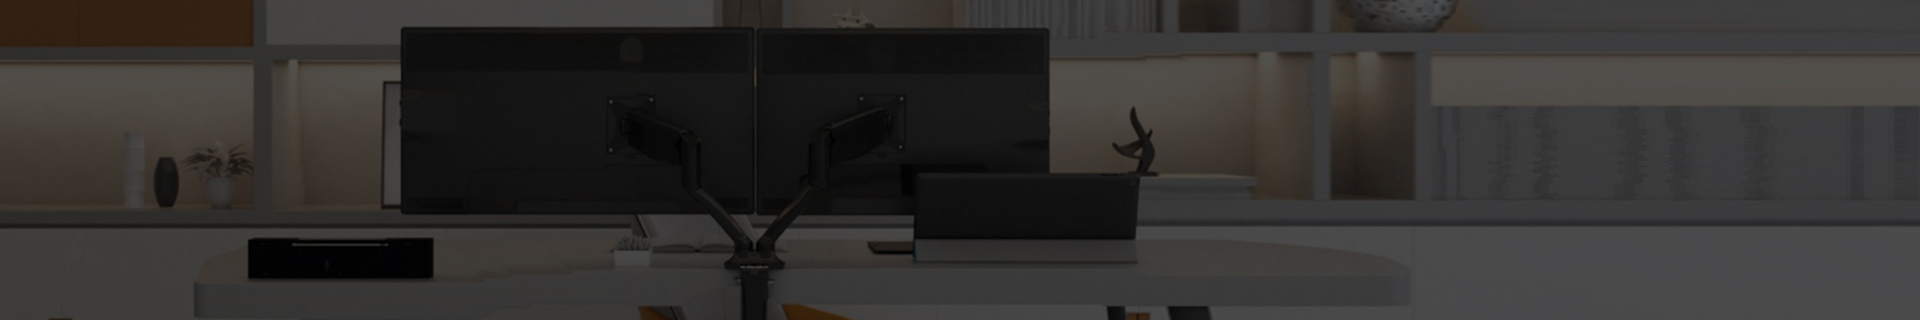 monitor arms-banner